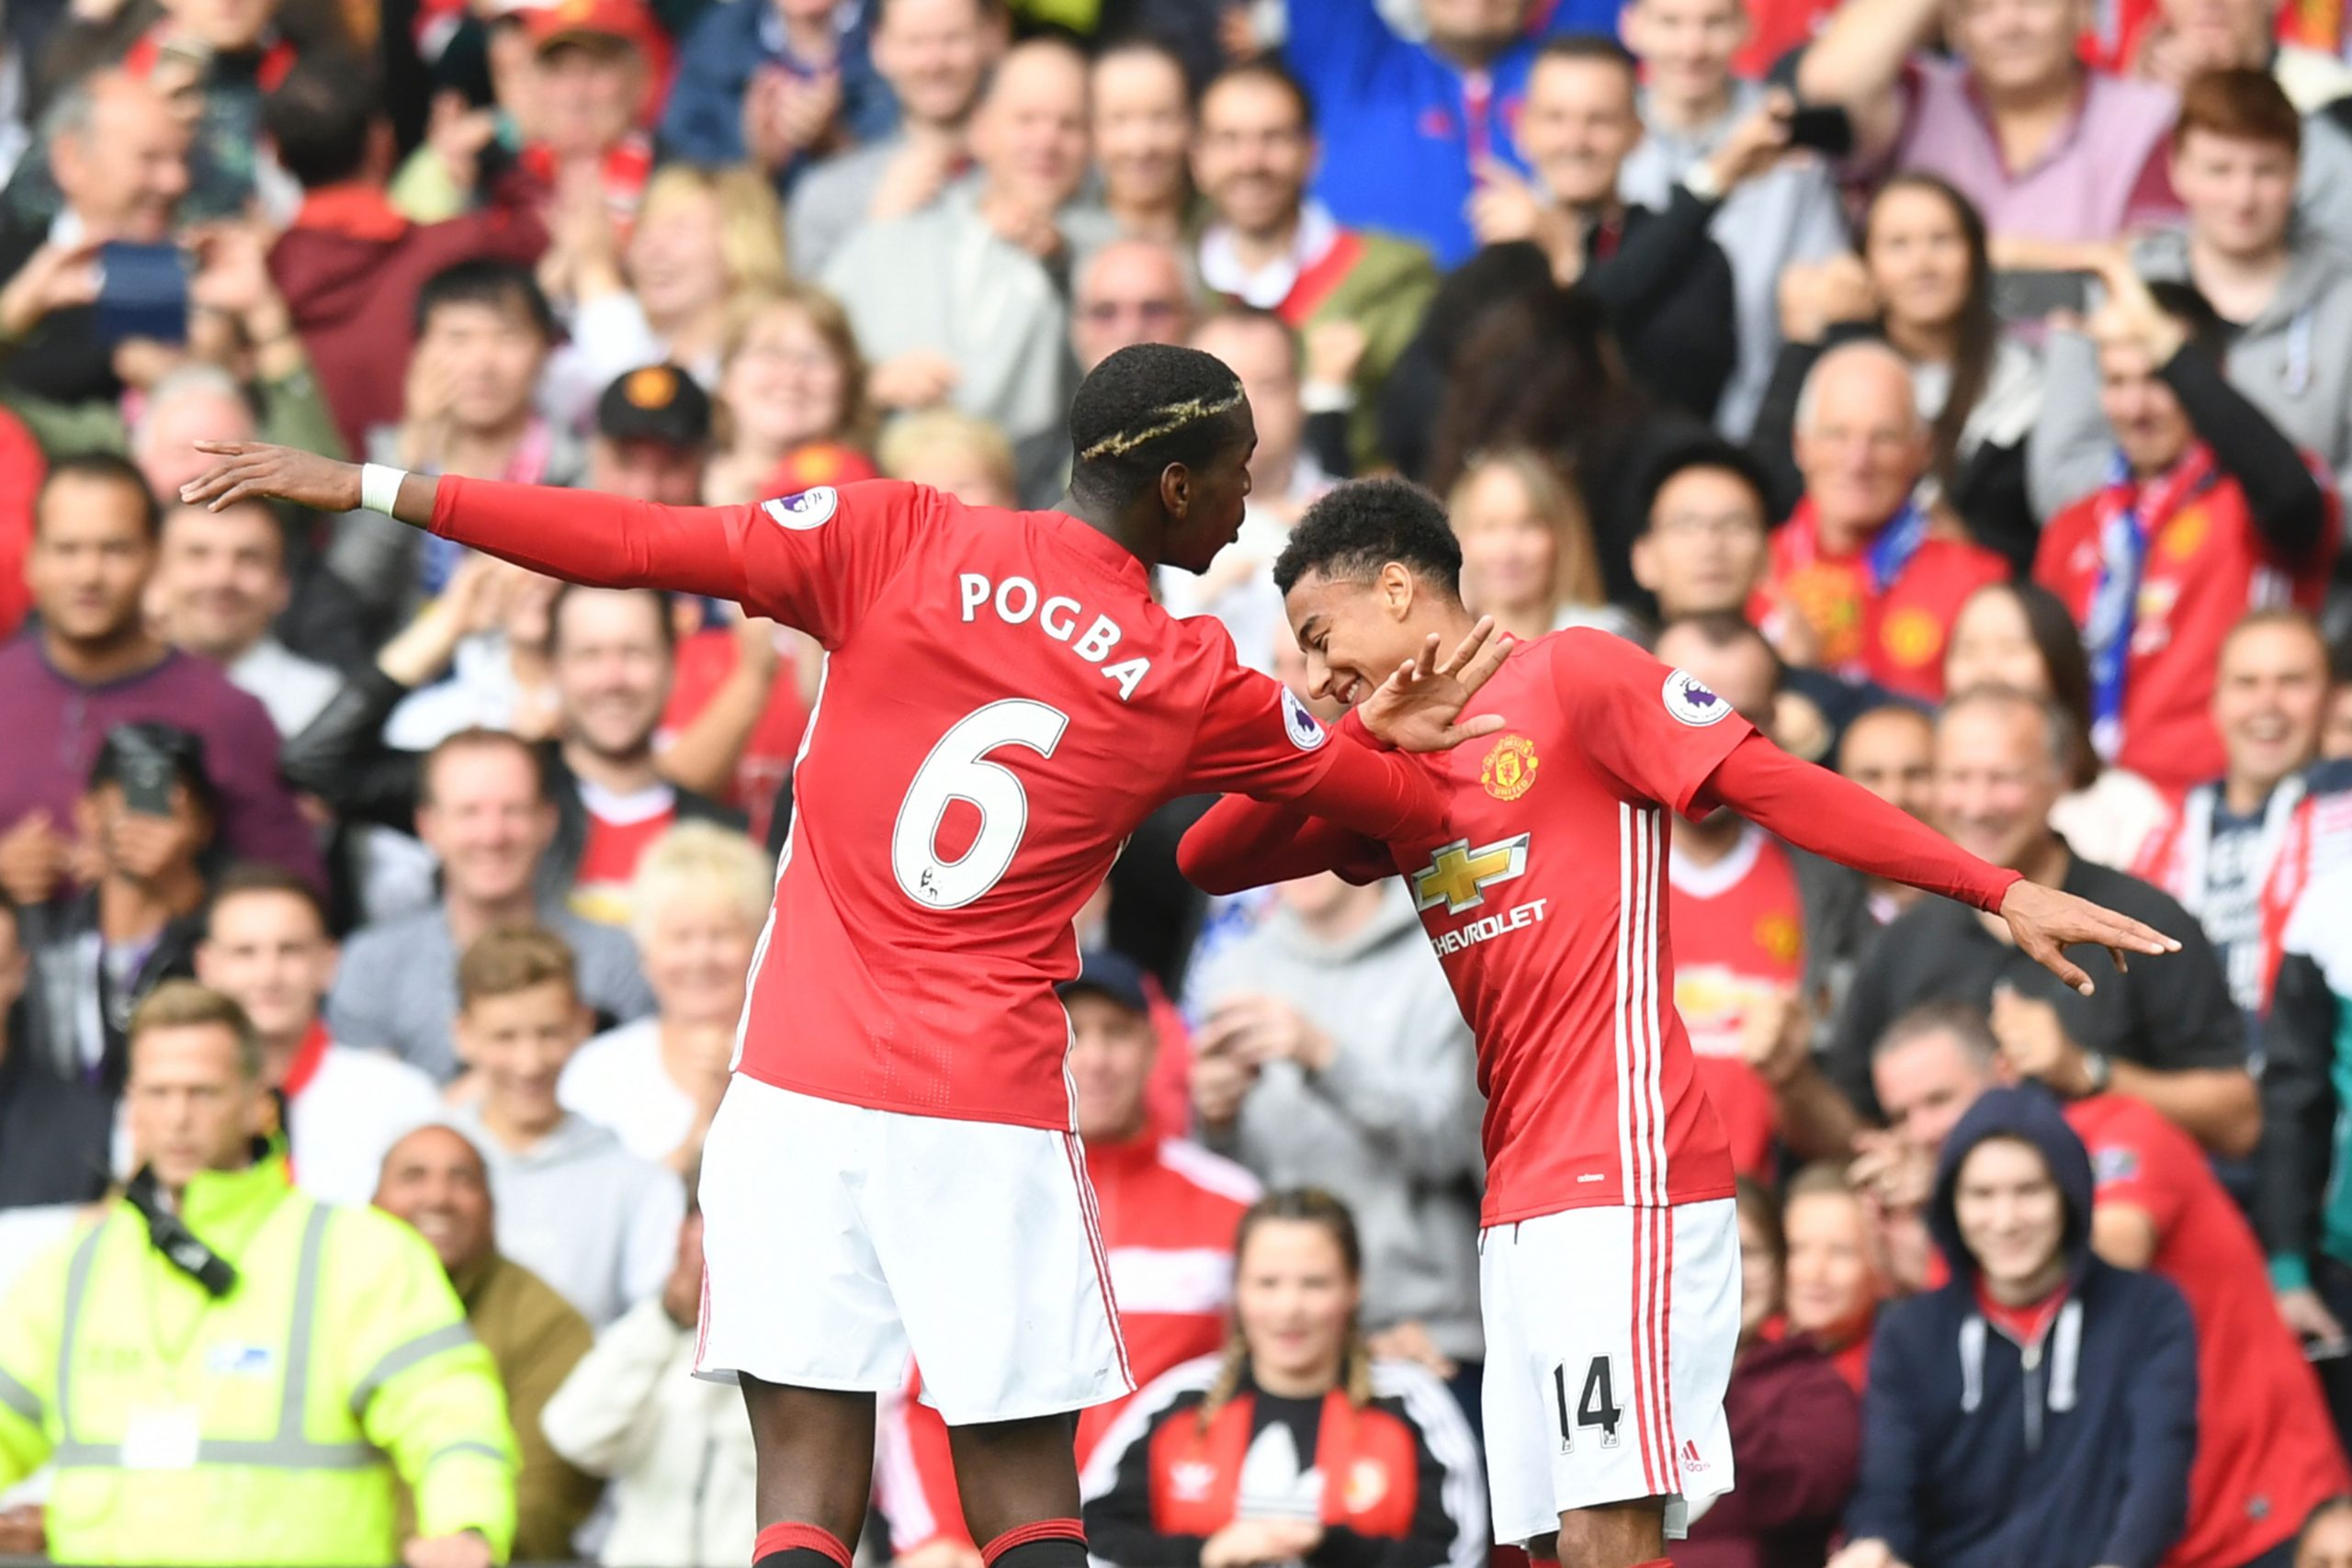 Manchester United's French midfielder Paul Pogba (L) and Manchester United's English midfielder Jesse Lingard (R) celebrate after Pogba scored their fourth goal during the English Premier League football match between Manchester United and Leicester City at Old Trafford in Manchester, north west England, on September 24, 2016. / AFP / ANTHONY DEVLIN / RESTRICTED TO EDITORIAL USE. No use with unauthorized audio, video, data, fixture lists, club/league logos or 'live' services. Online in-match use limited to 75 images, no video emulation. No use in betting, games or single club/league/player publications.  /         (Photo credit should read ANTHONY DEVLIN/AFP/Getty Images)